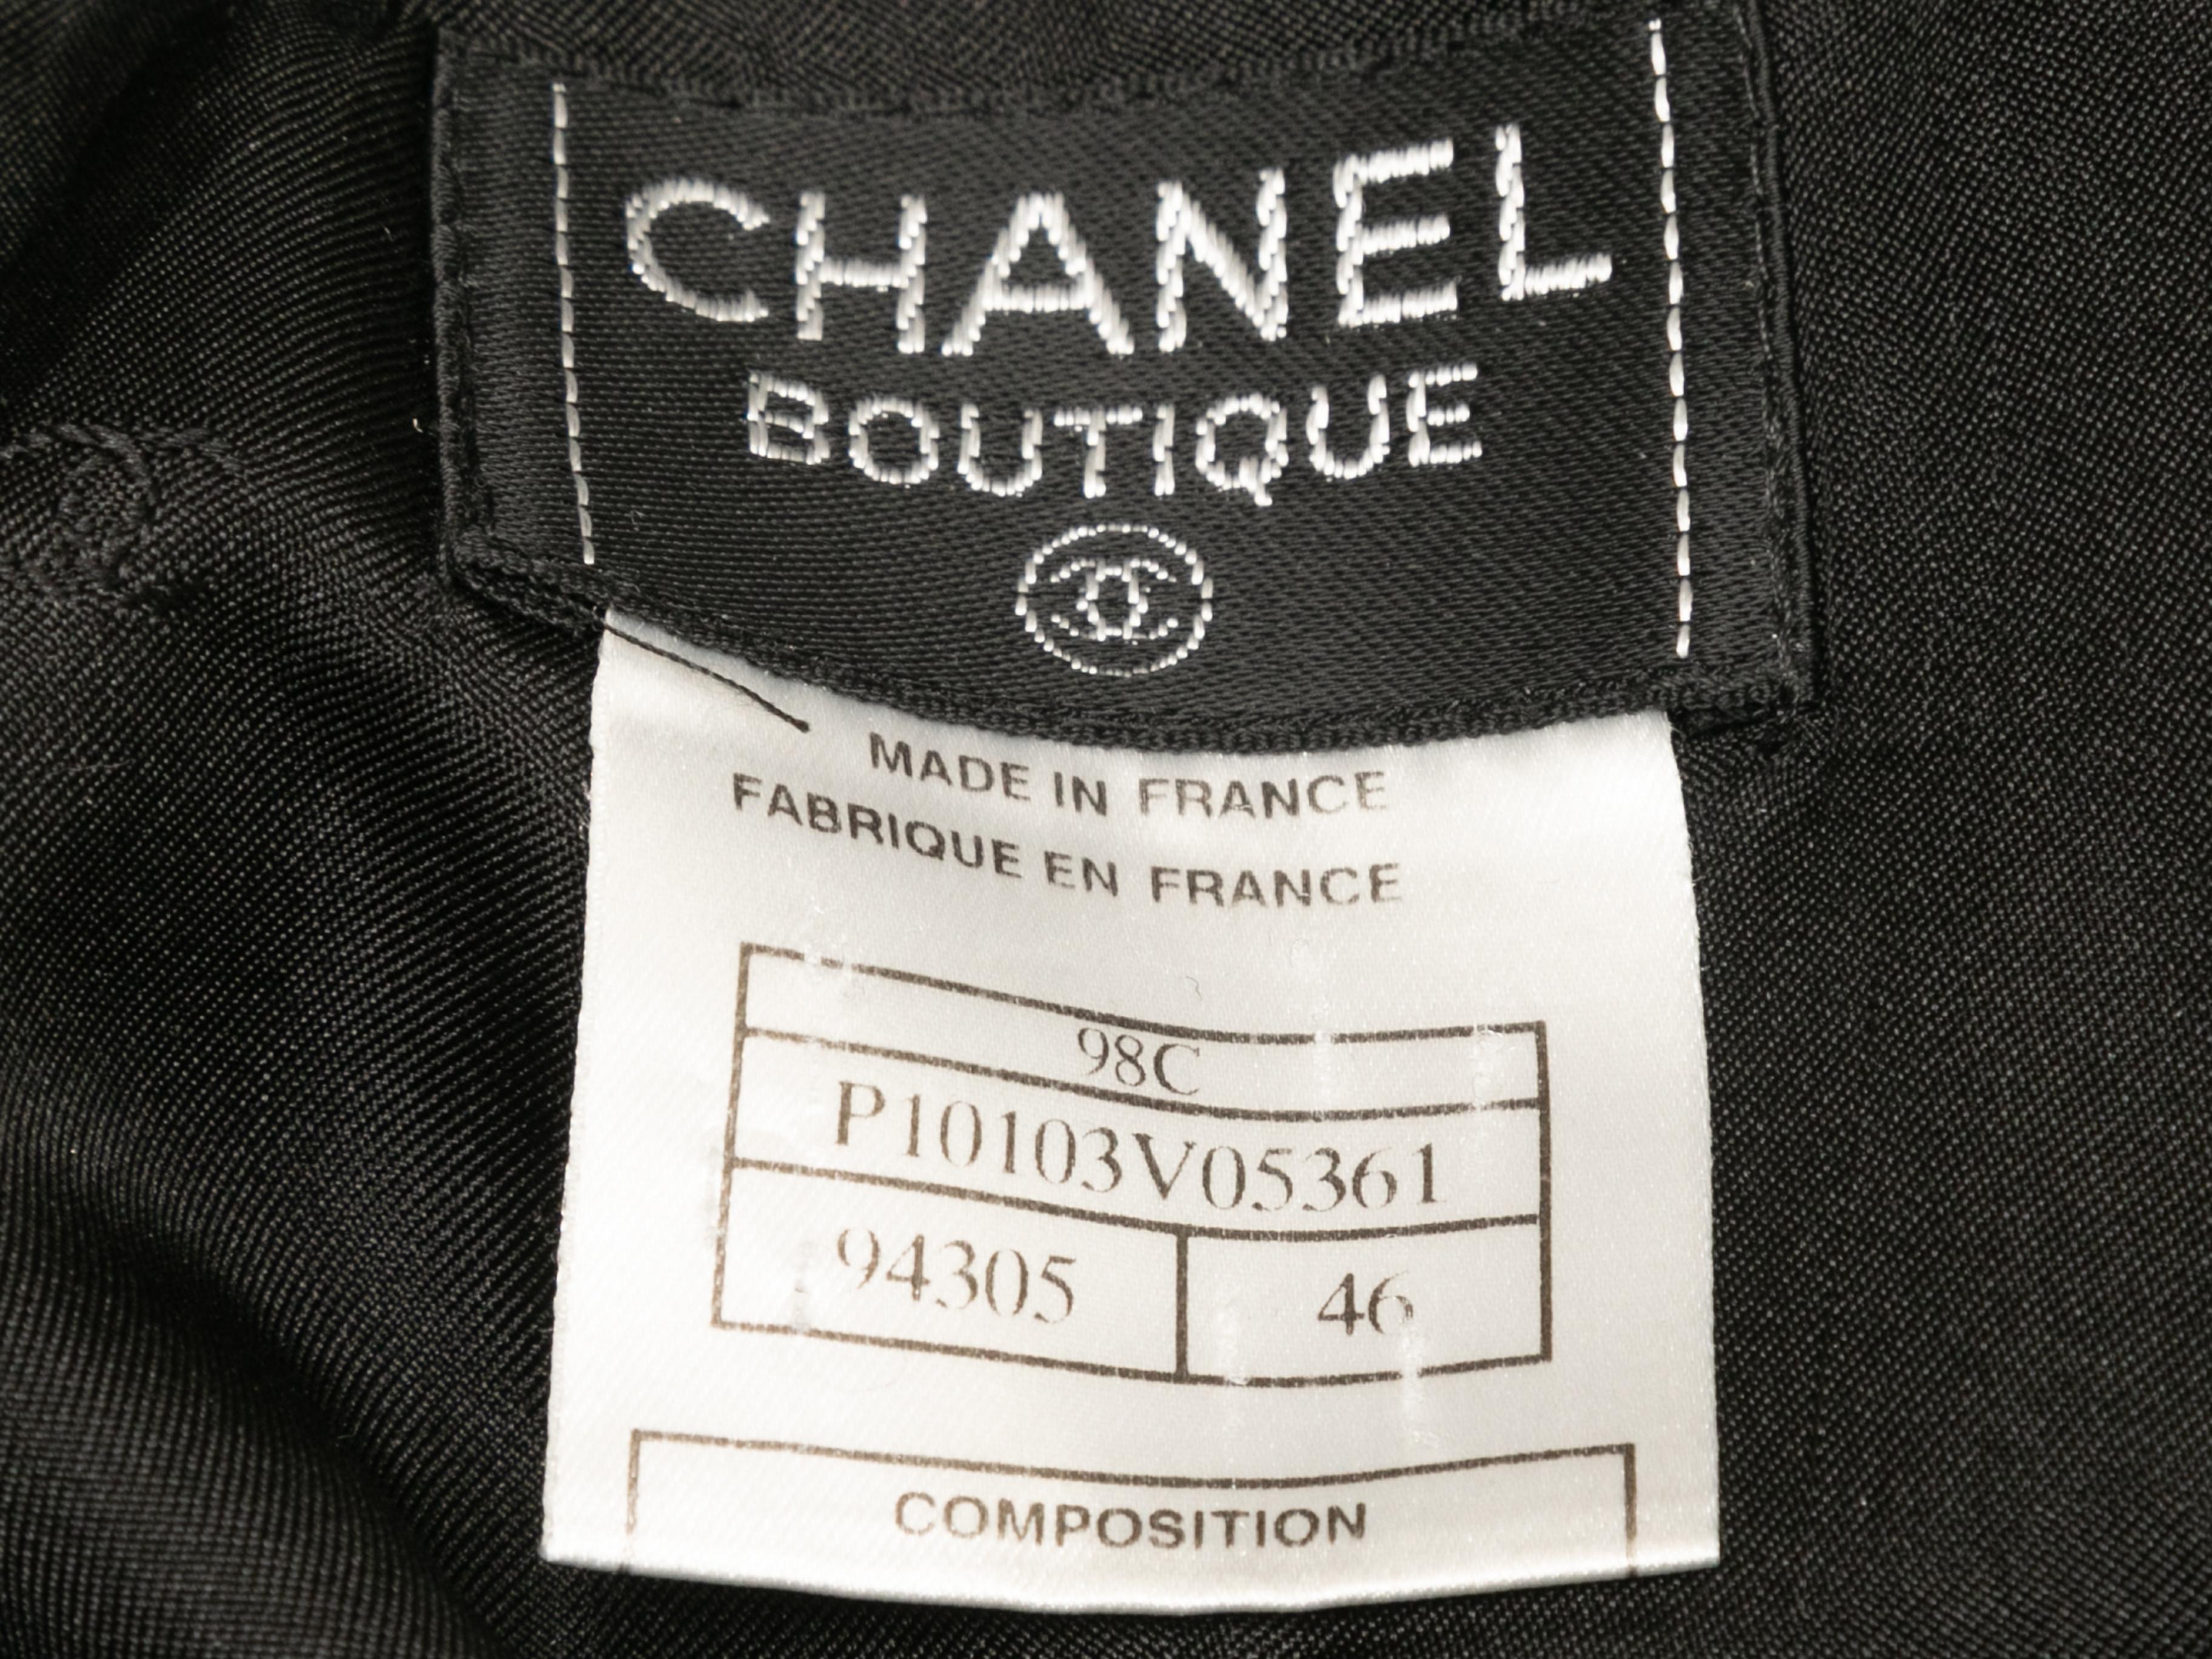 Vintage black wool pencil skirt by Chanel Boutique. From the Cruise 1998 Collection. Back zip and button closures. 31